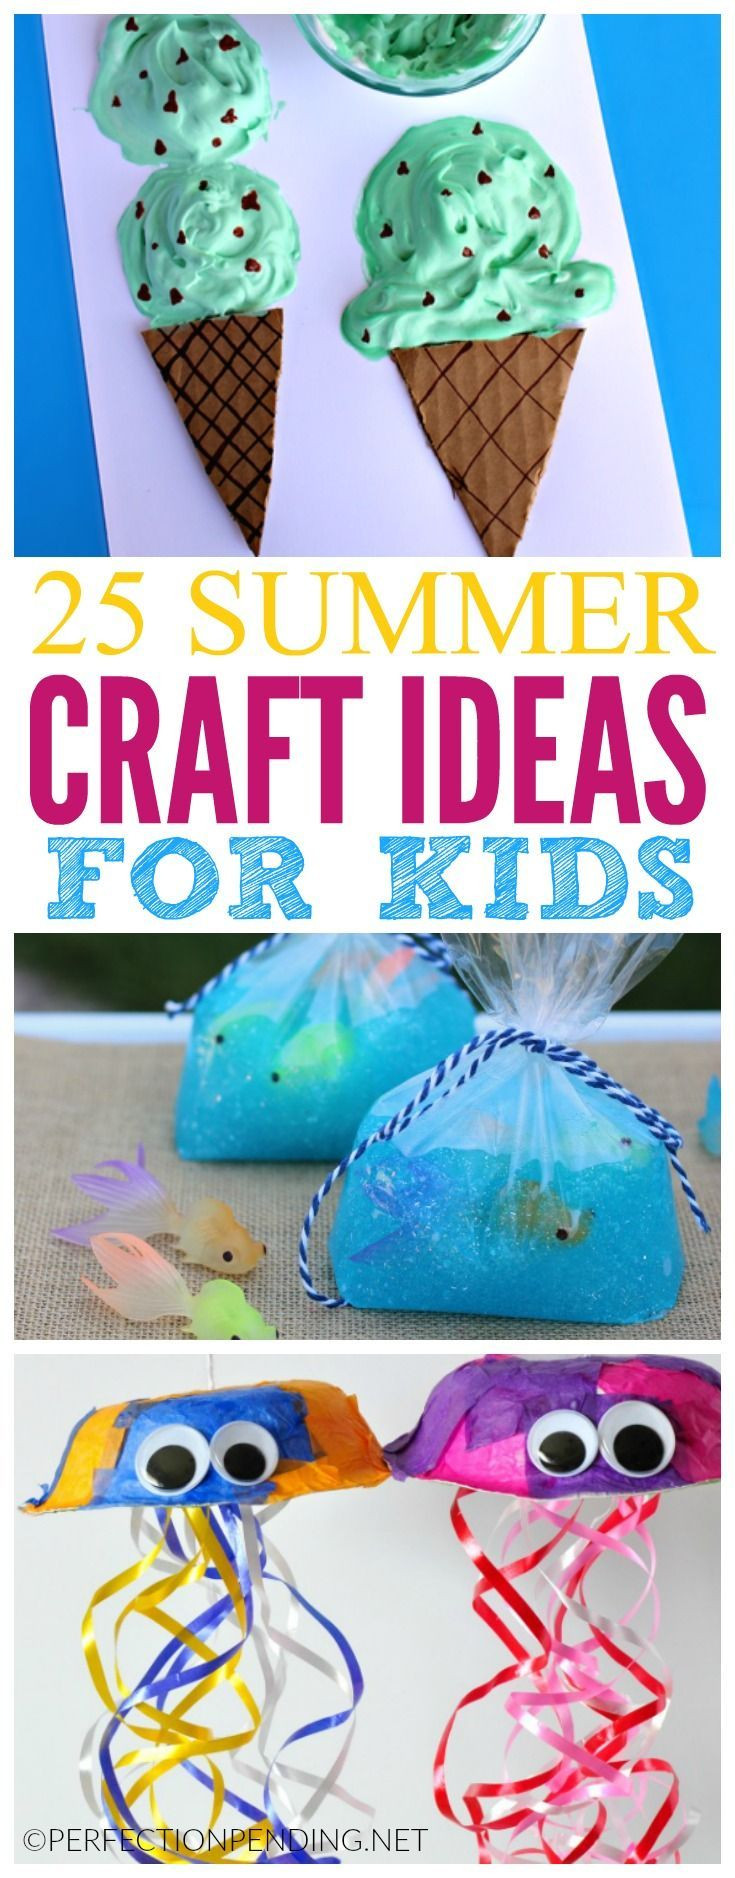 Preschool Arts And Crafts For Summer
 1474 best Spring & Summer Kids Crafts & Activities images